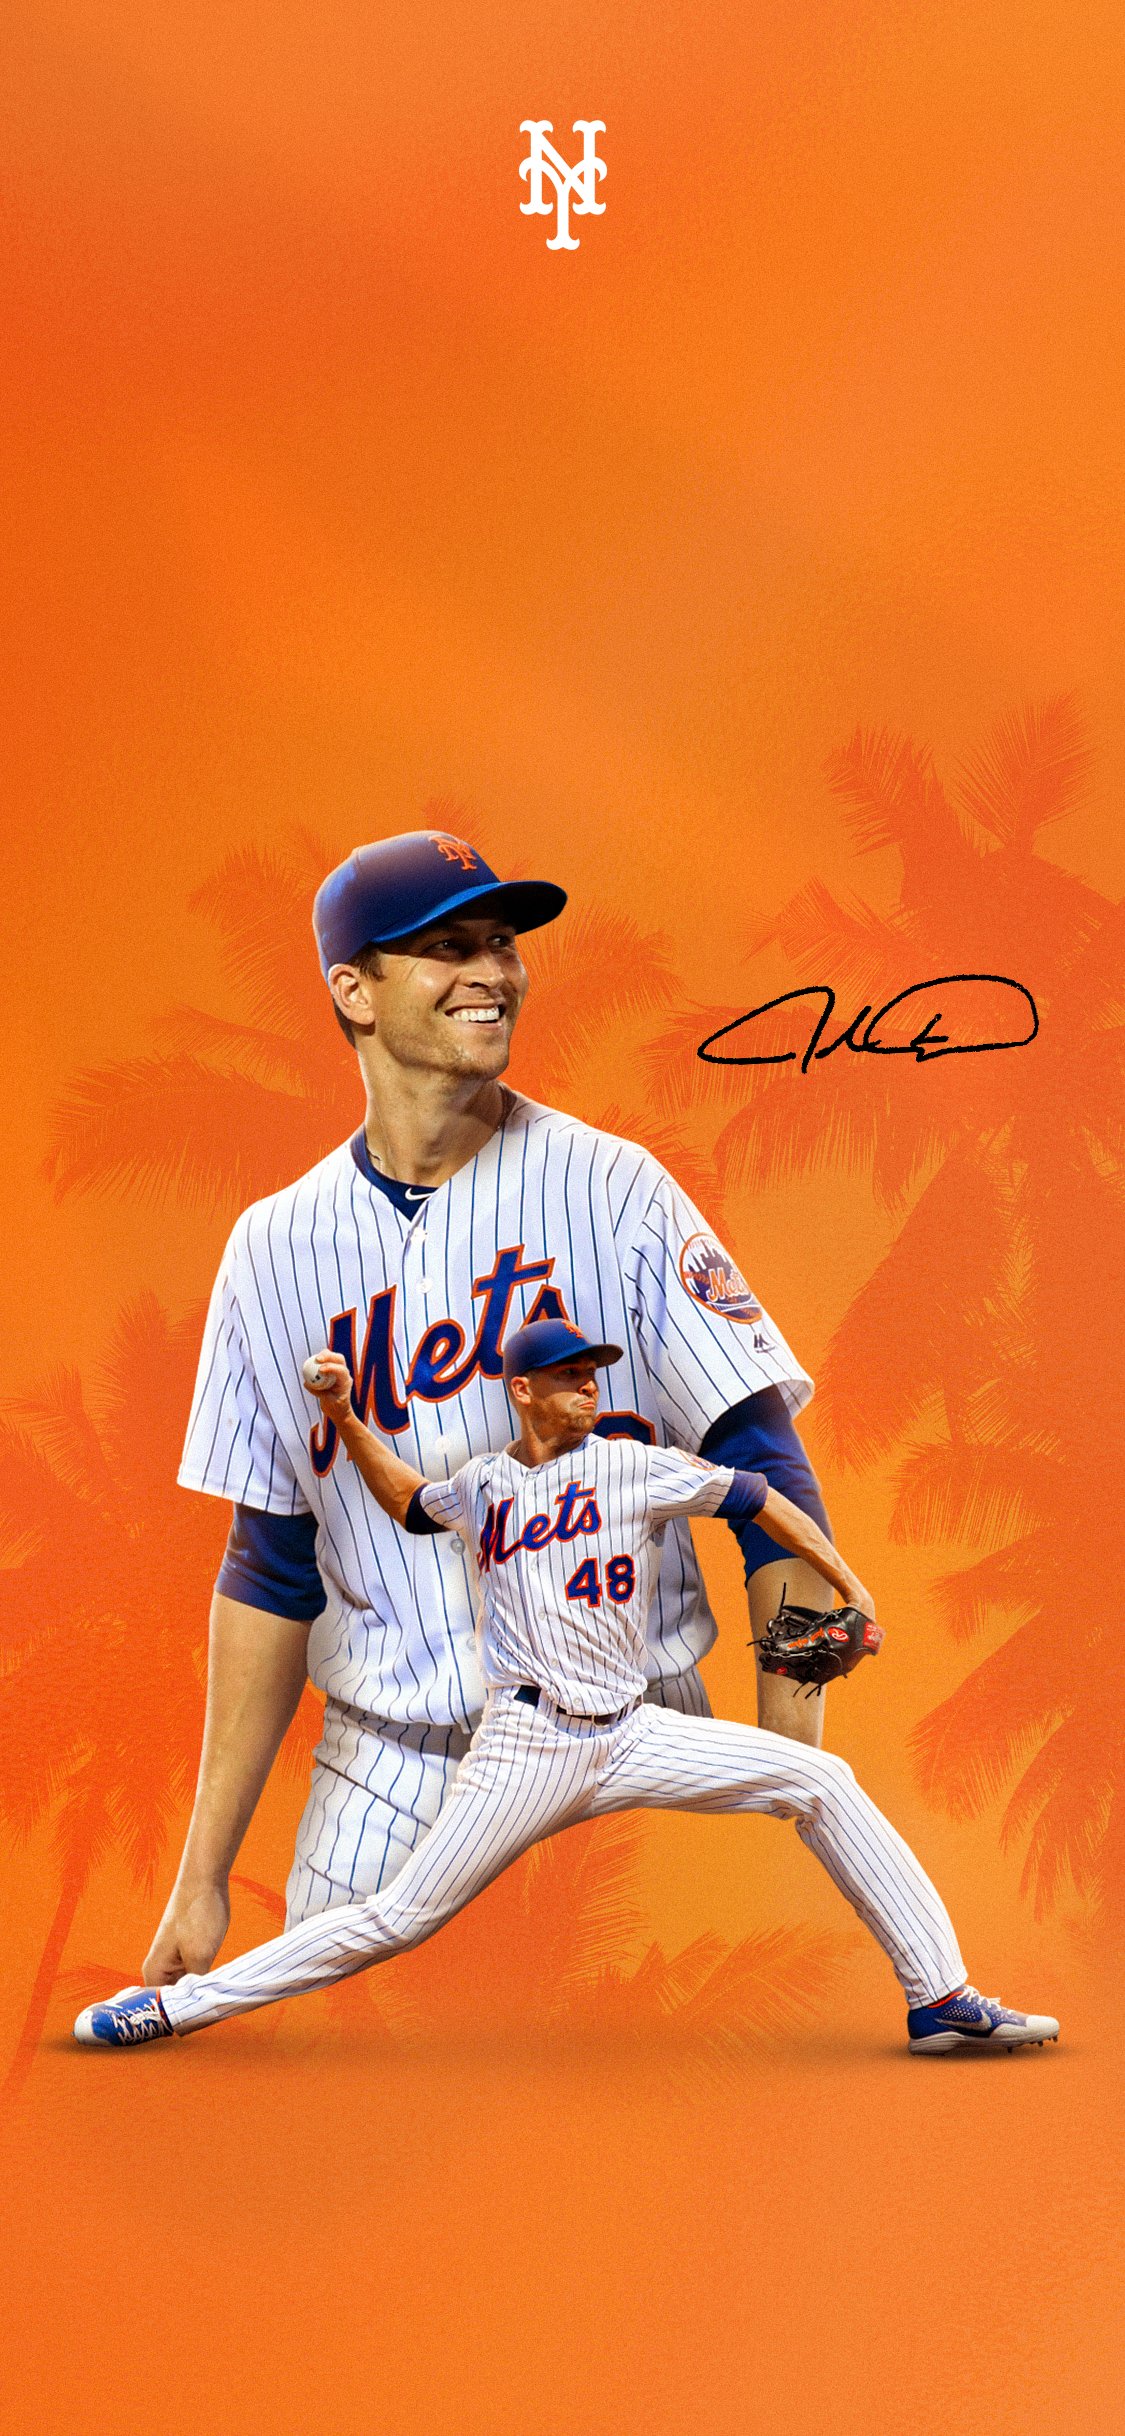 NY Mets wallpaper by Jansingjames  Download on ZEDGE  2039